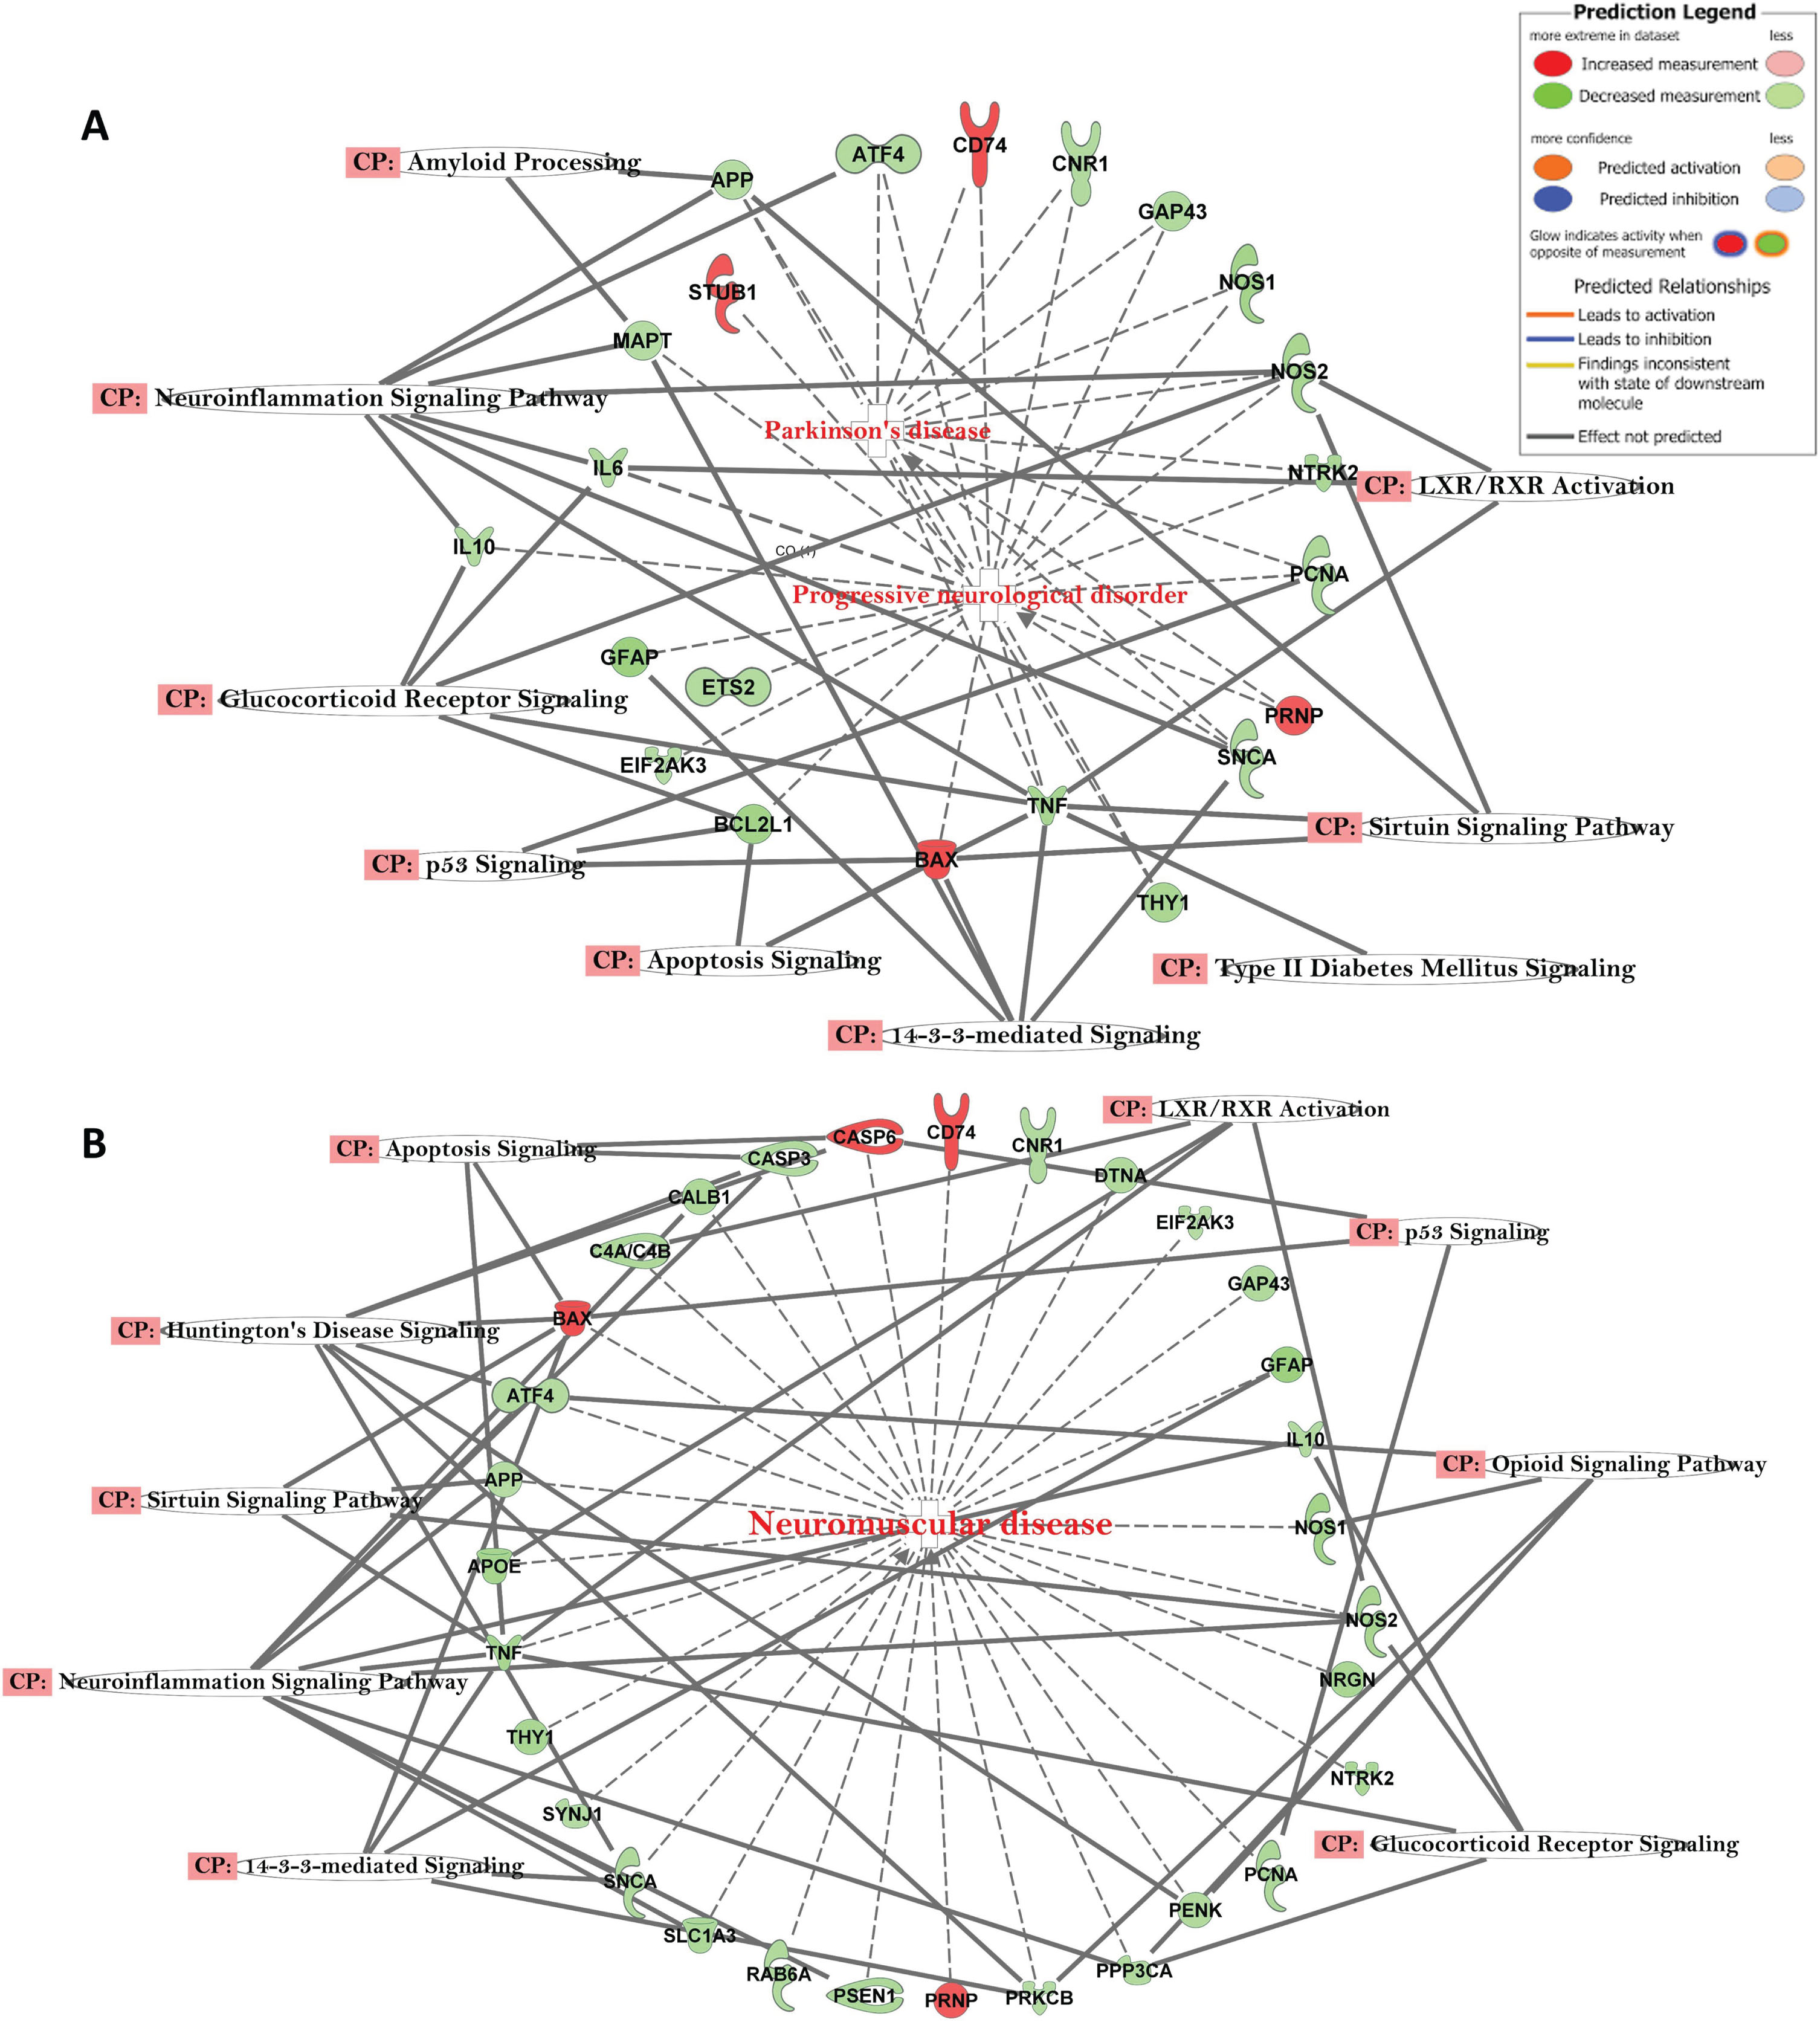 A) Network of differentially expressed genes in the important signaling pathways of progressive neurological disorders and linked with Parkinson’s disease in AD subjects. B) Network of differentially expressed genes in the important signaling pathways of progressive neurological disorders linked with neuromuscular disease in AD subjects.